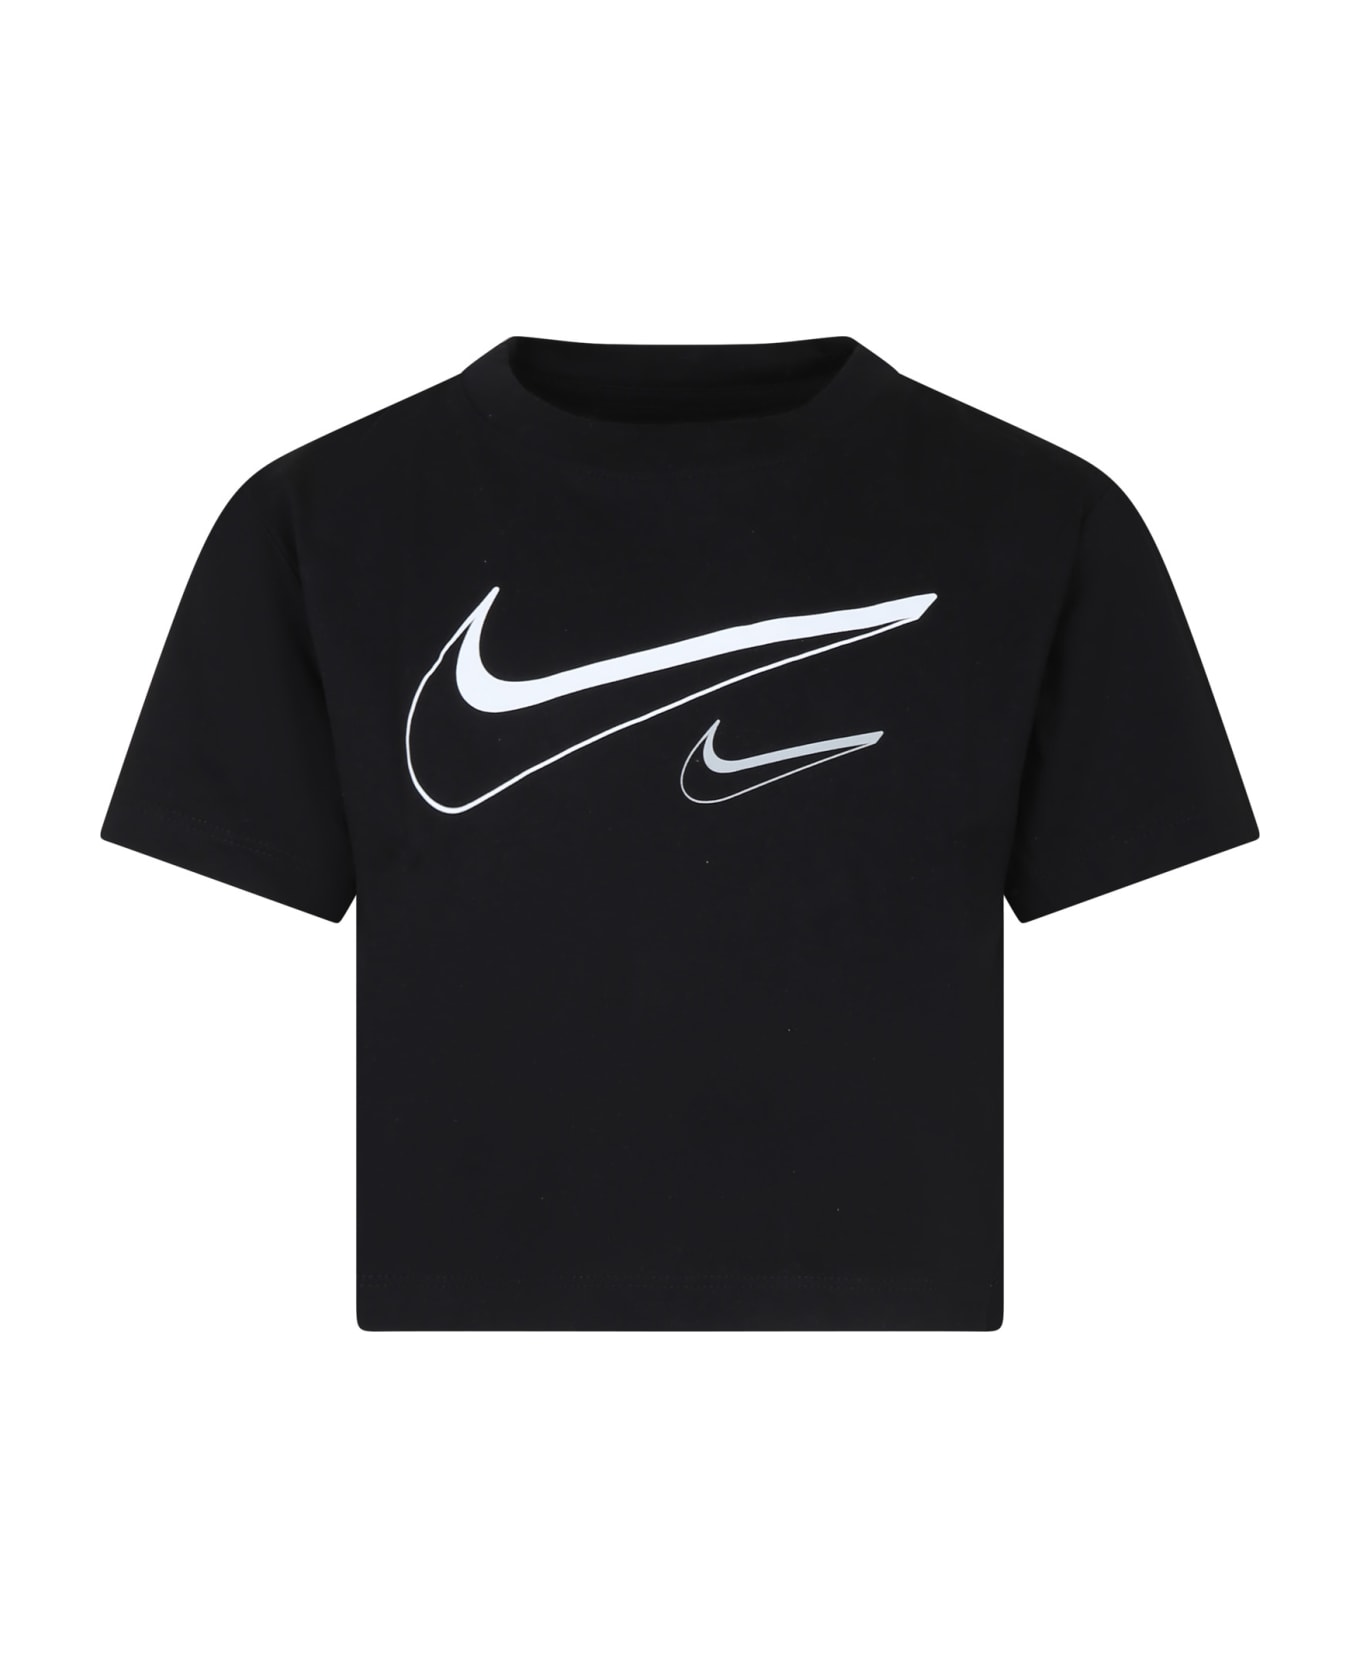 Nike Black T-shirt For Girl With Swoosh - Black Tシャツ＆ポロシャツ